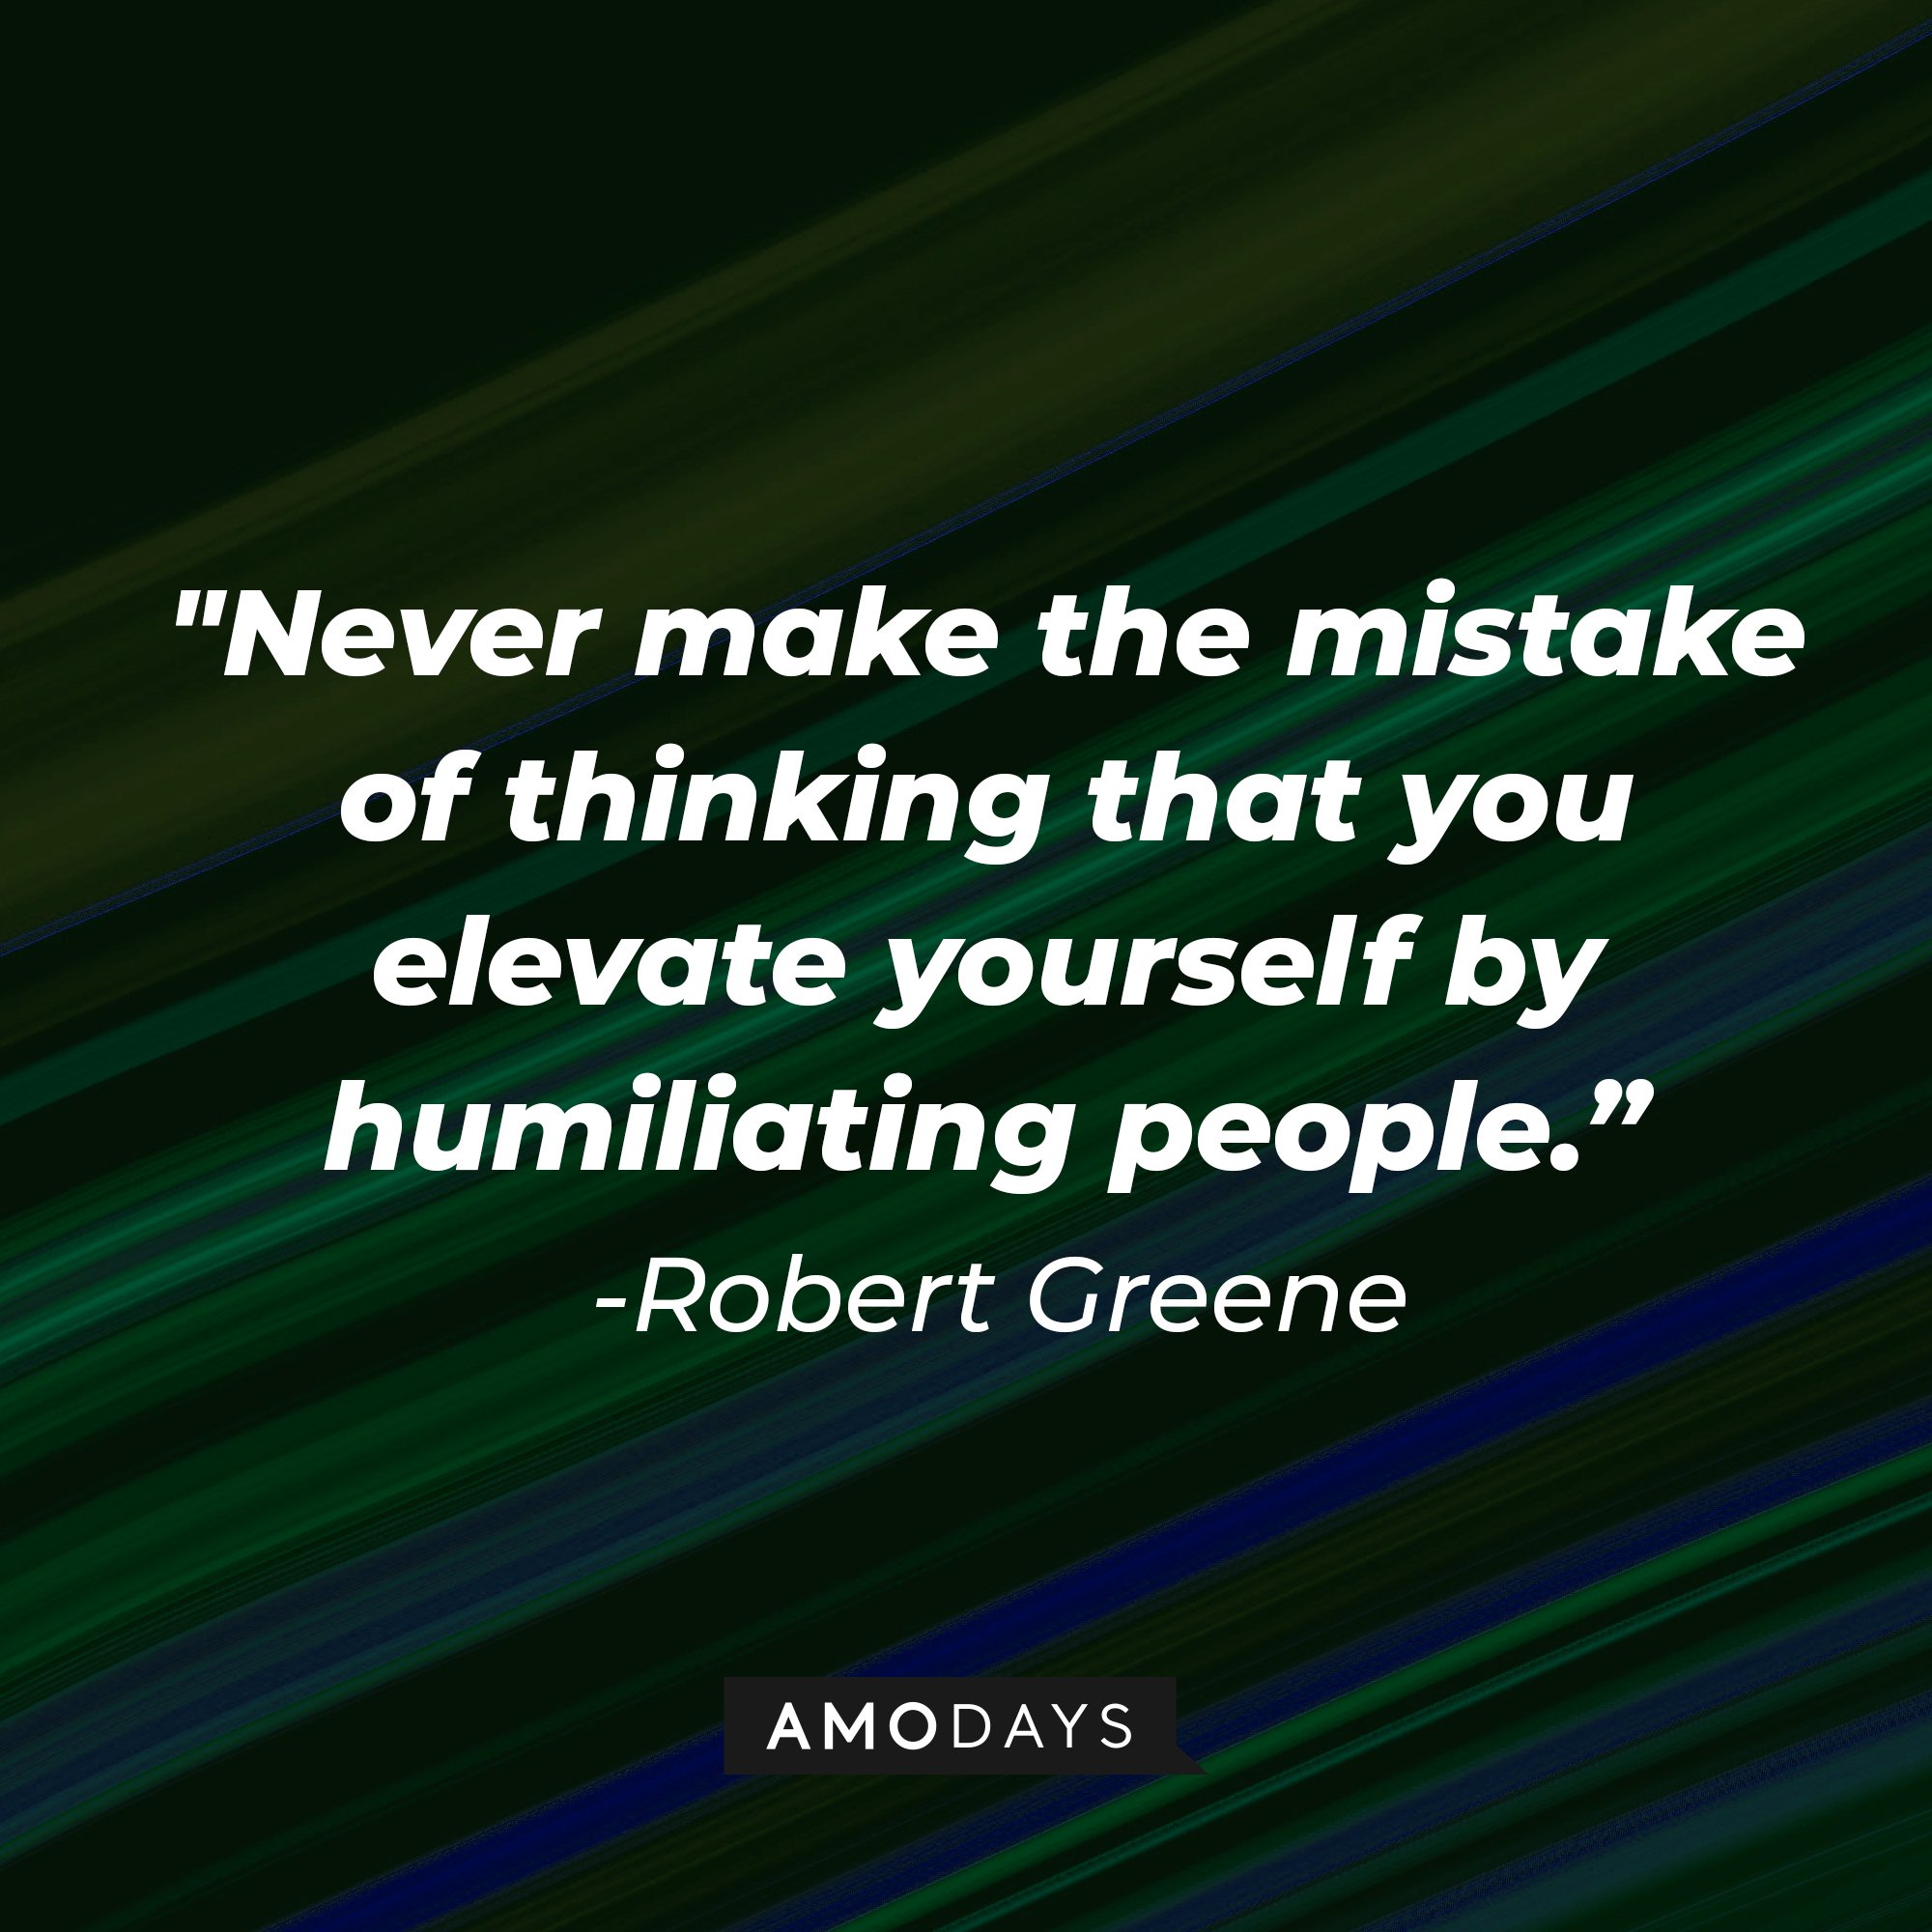 Robert Greene’s quote: "Never make the mistake of thinking that you elevate yourself by humiliating people." | Image: AmoDays